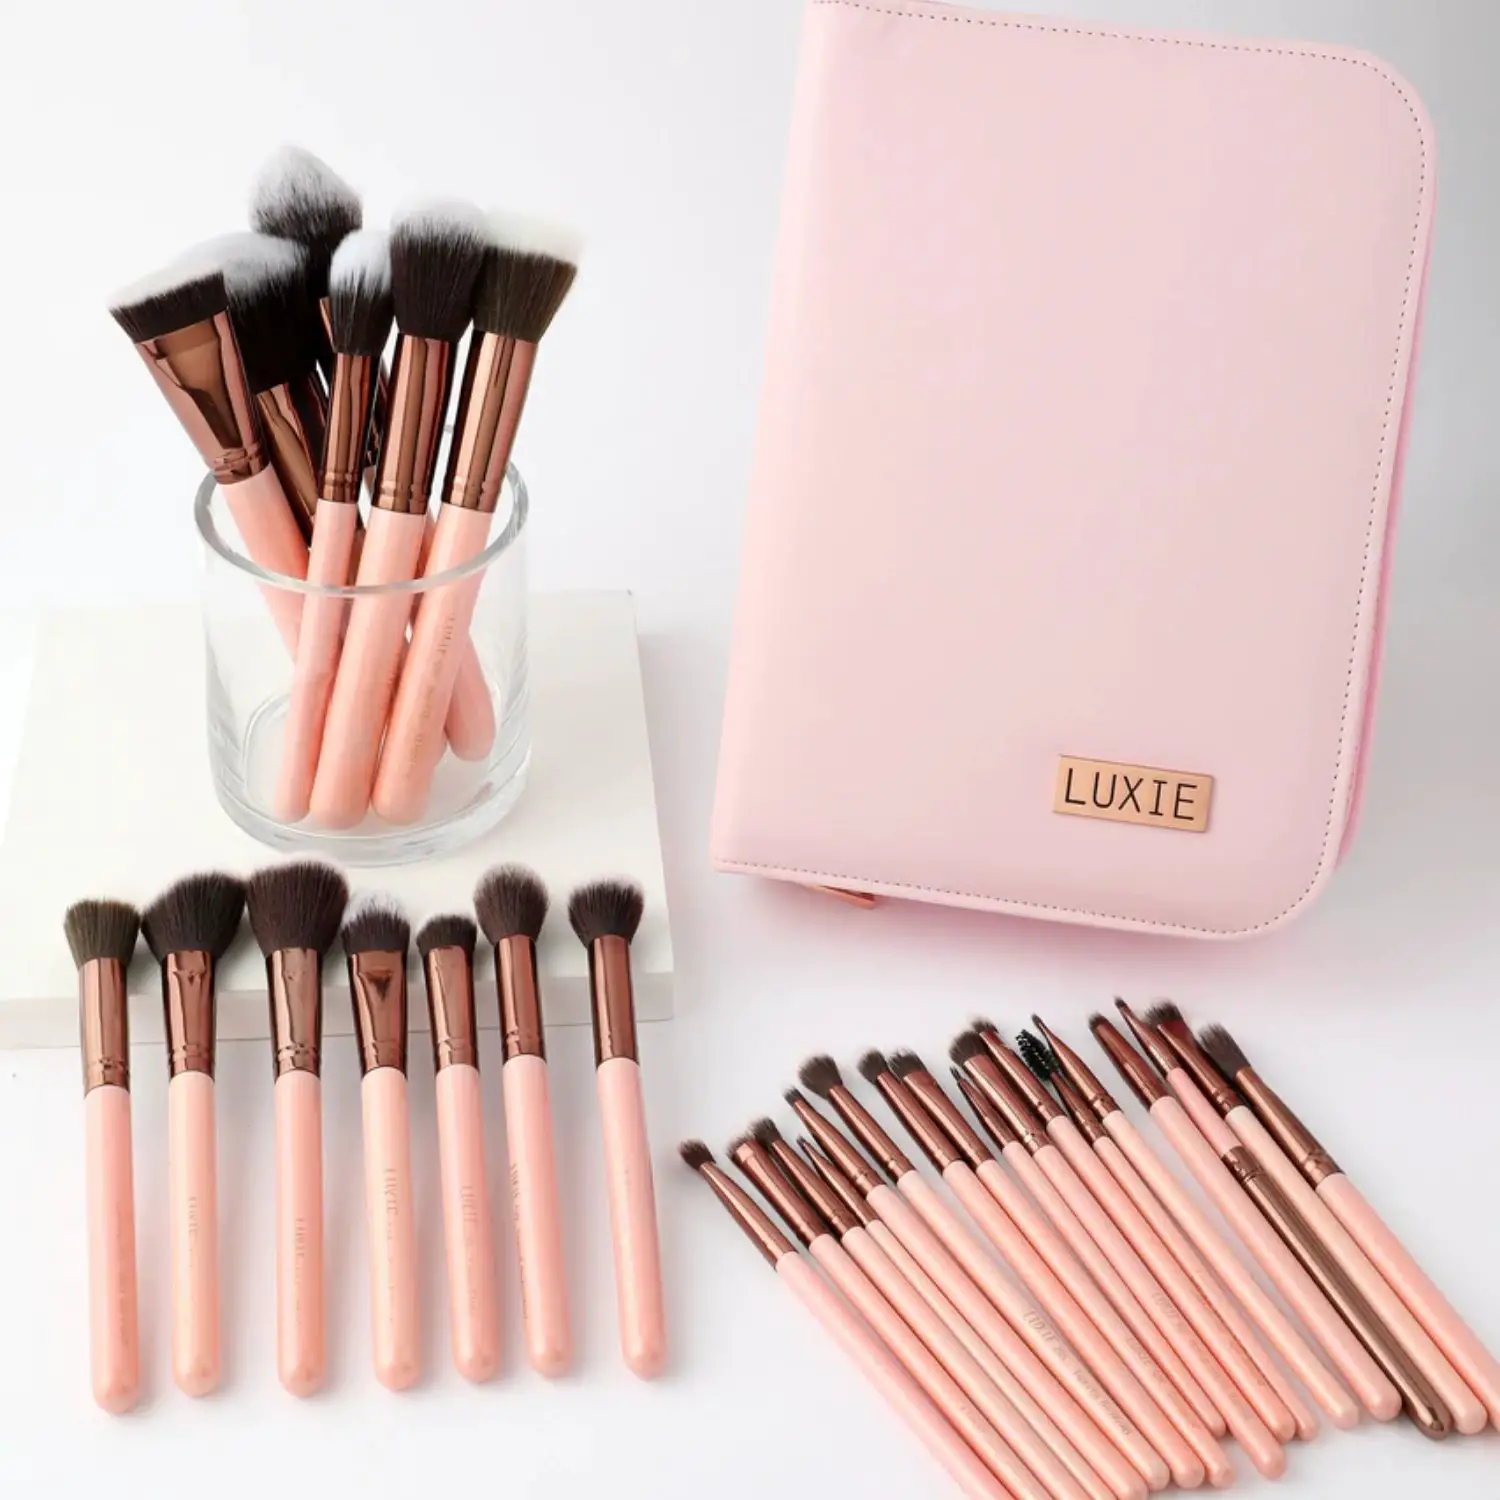 Luxie Beauty: Rose Gold 30-piece brush set